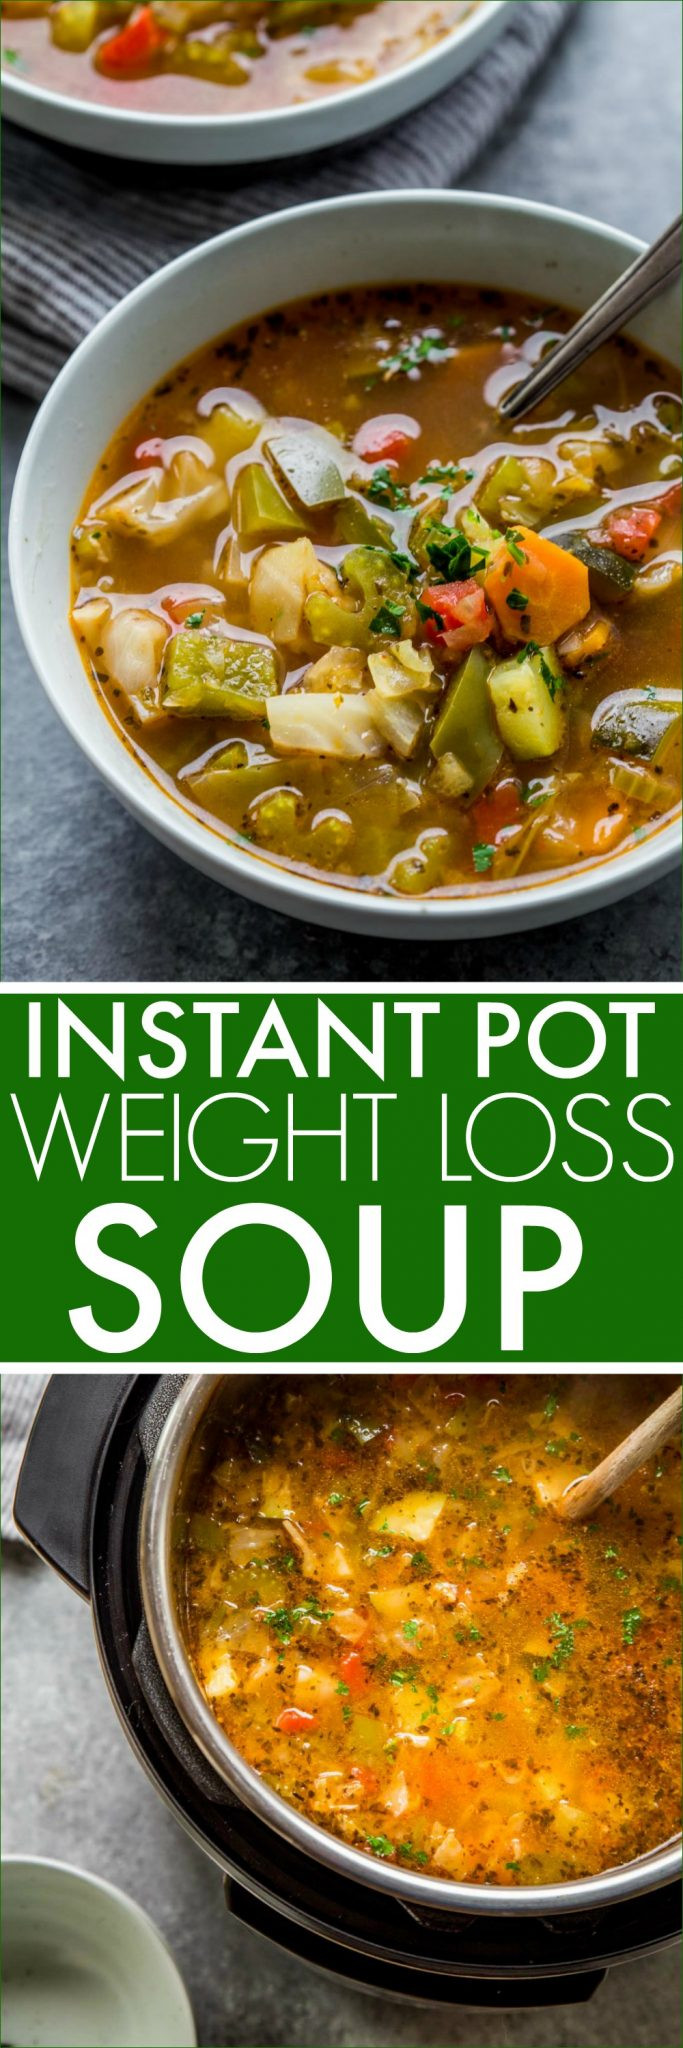 Instant Pot Recipes For Weight Loss
 Instant Pot Weight Loss Soup with Stovetop Instructions